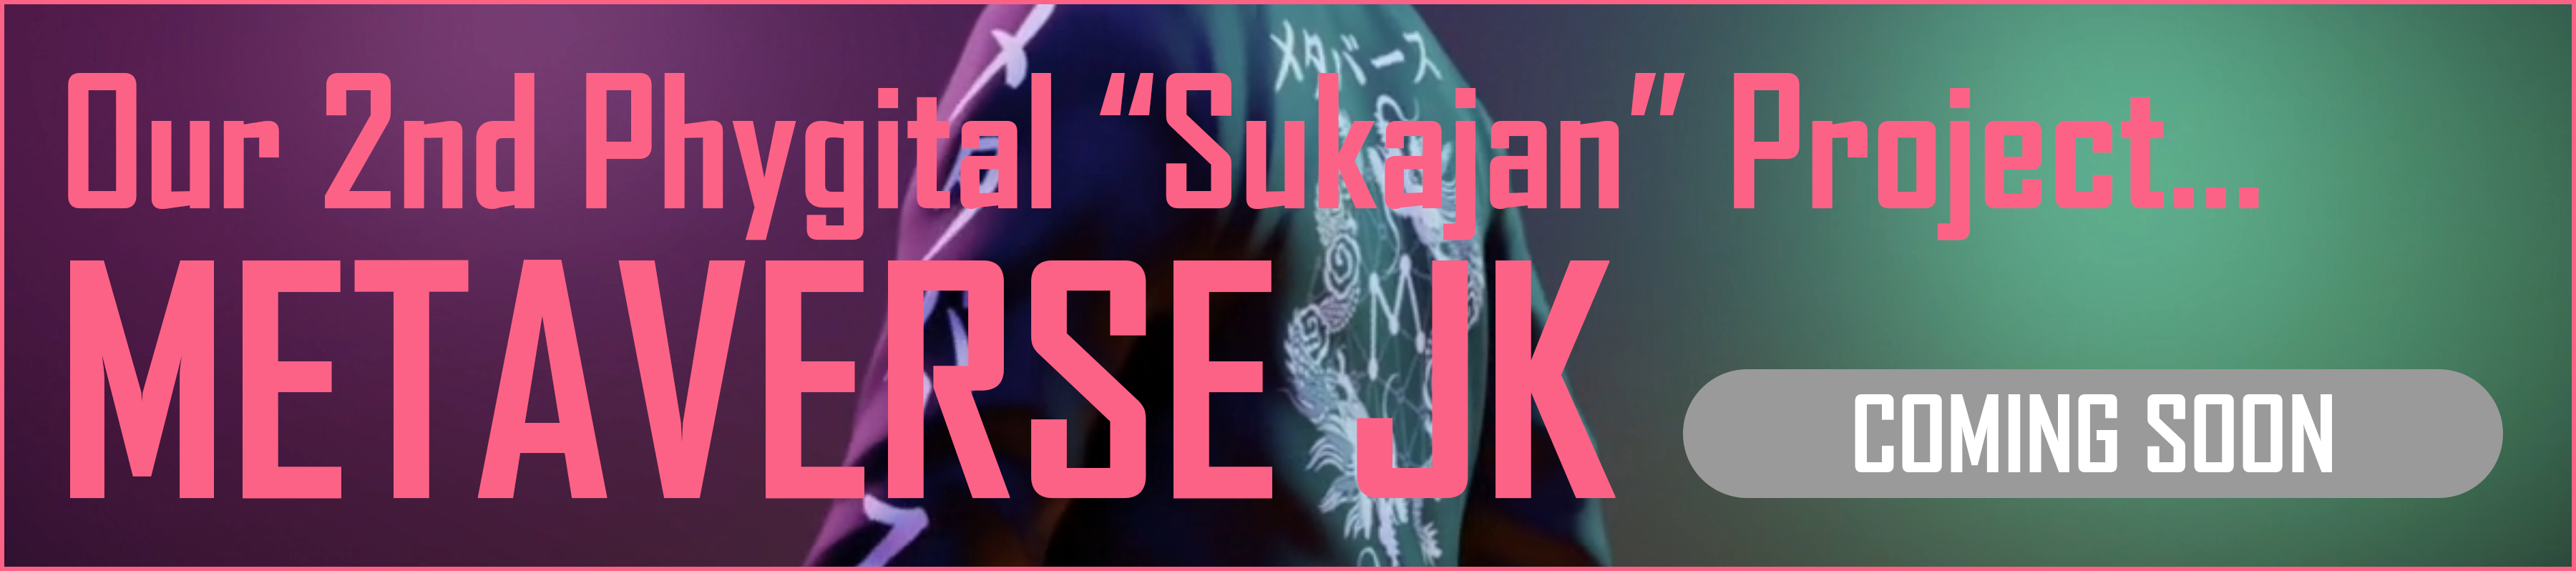 Our 2nd Phygital “Sukajan” Project... METAVERSE JK coming soon.